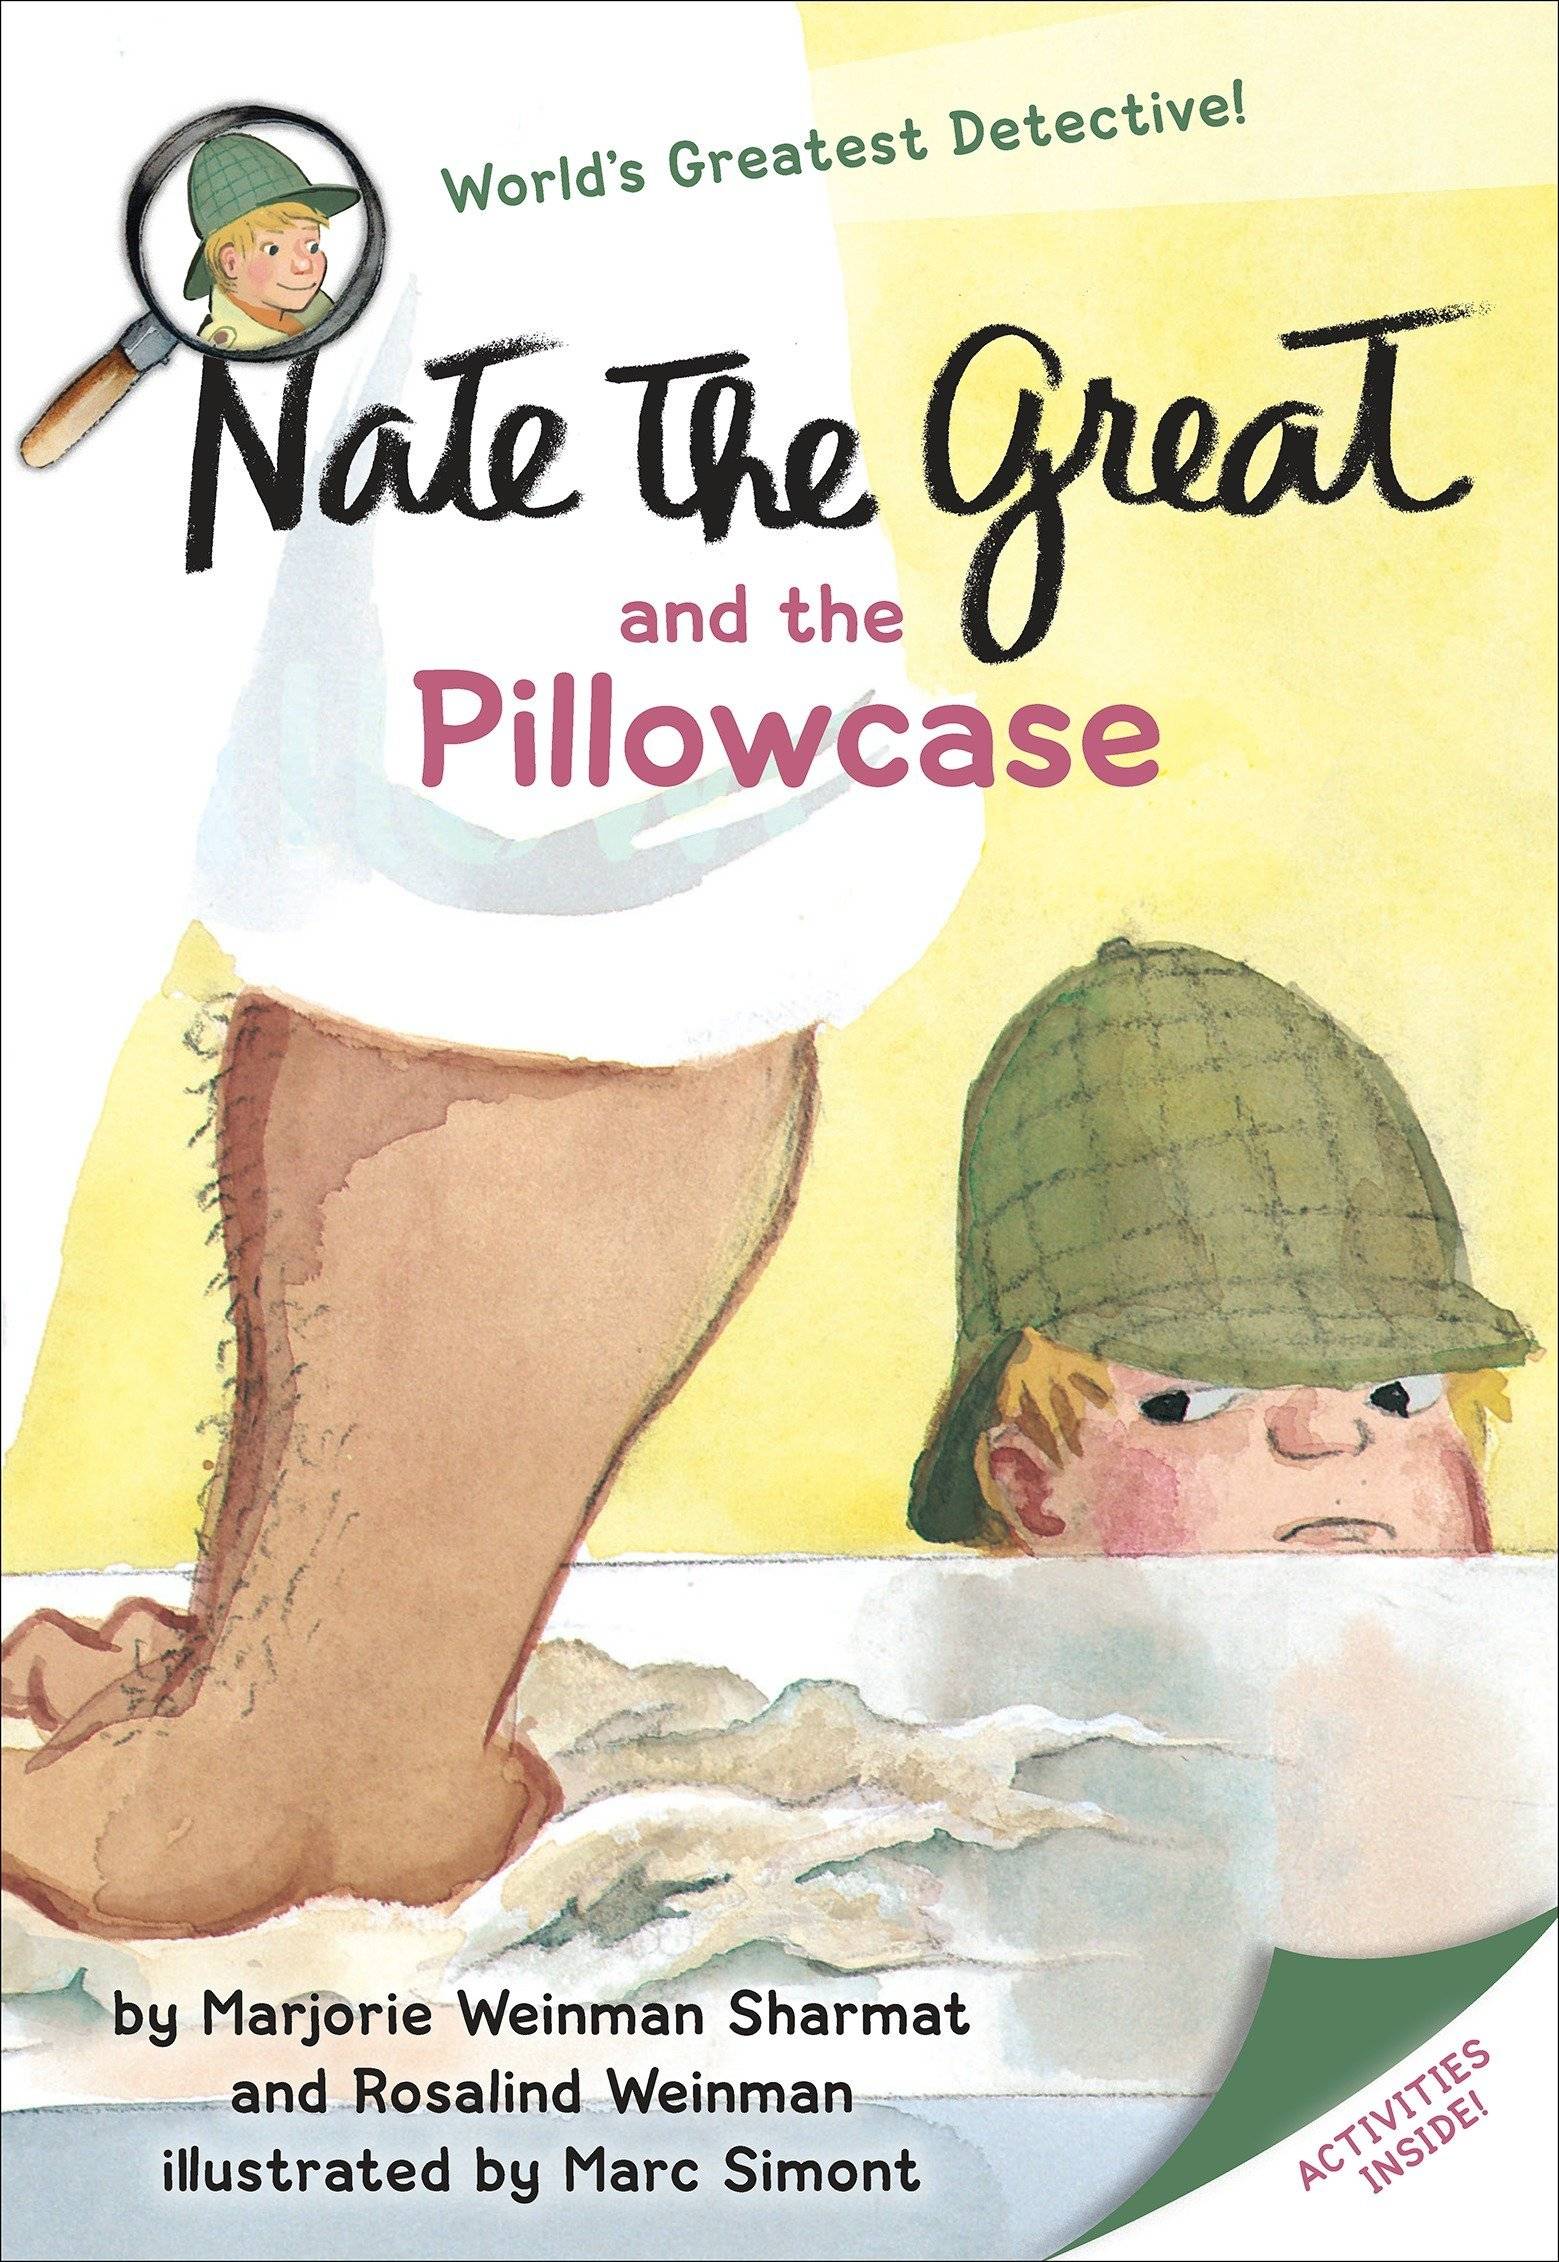 IMG : Nate the great and the Pillow Case